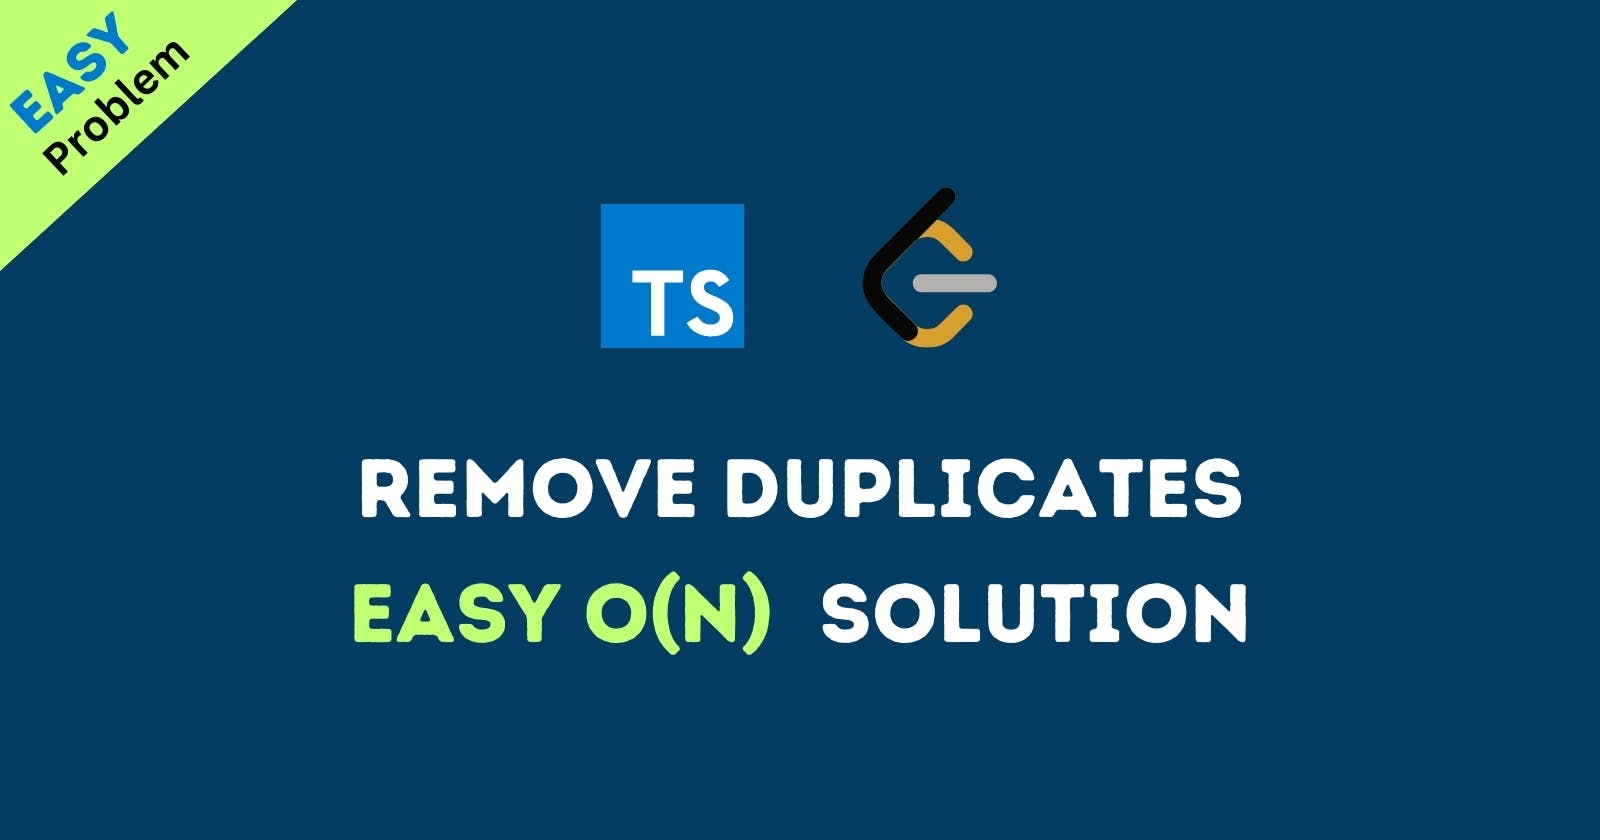 Remove Duplicates in Sorted Array- Easy Leetcode Solution using TypeScript